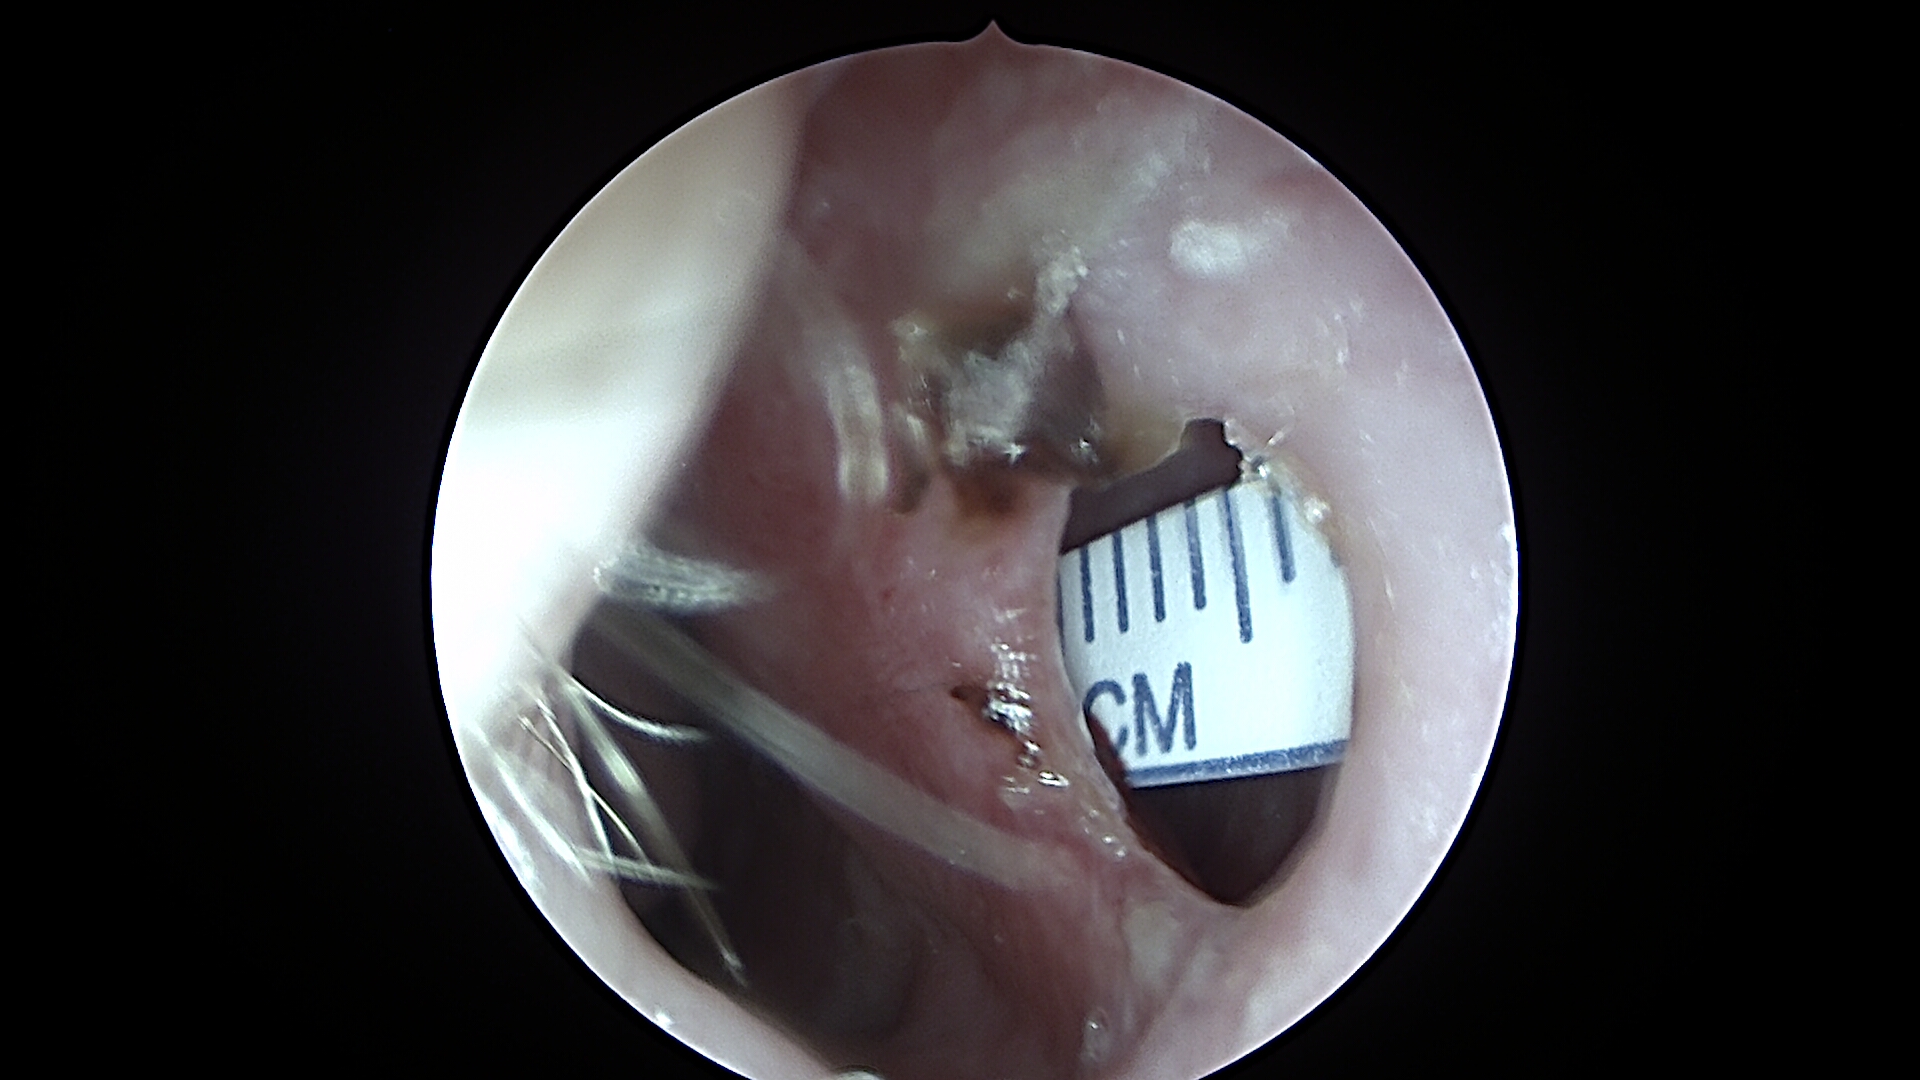 8 mm anterior nasal septal perforation with moderate associated crusting